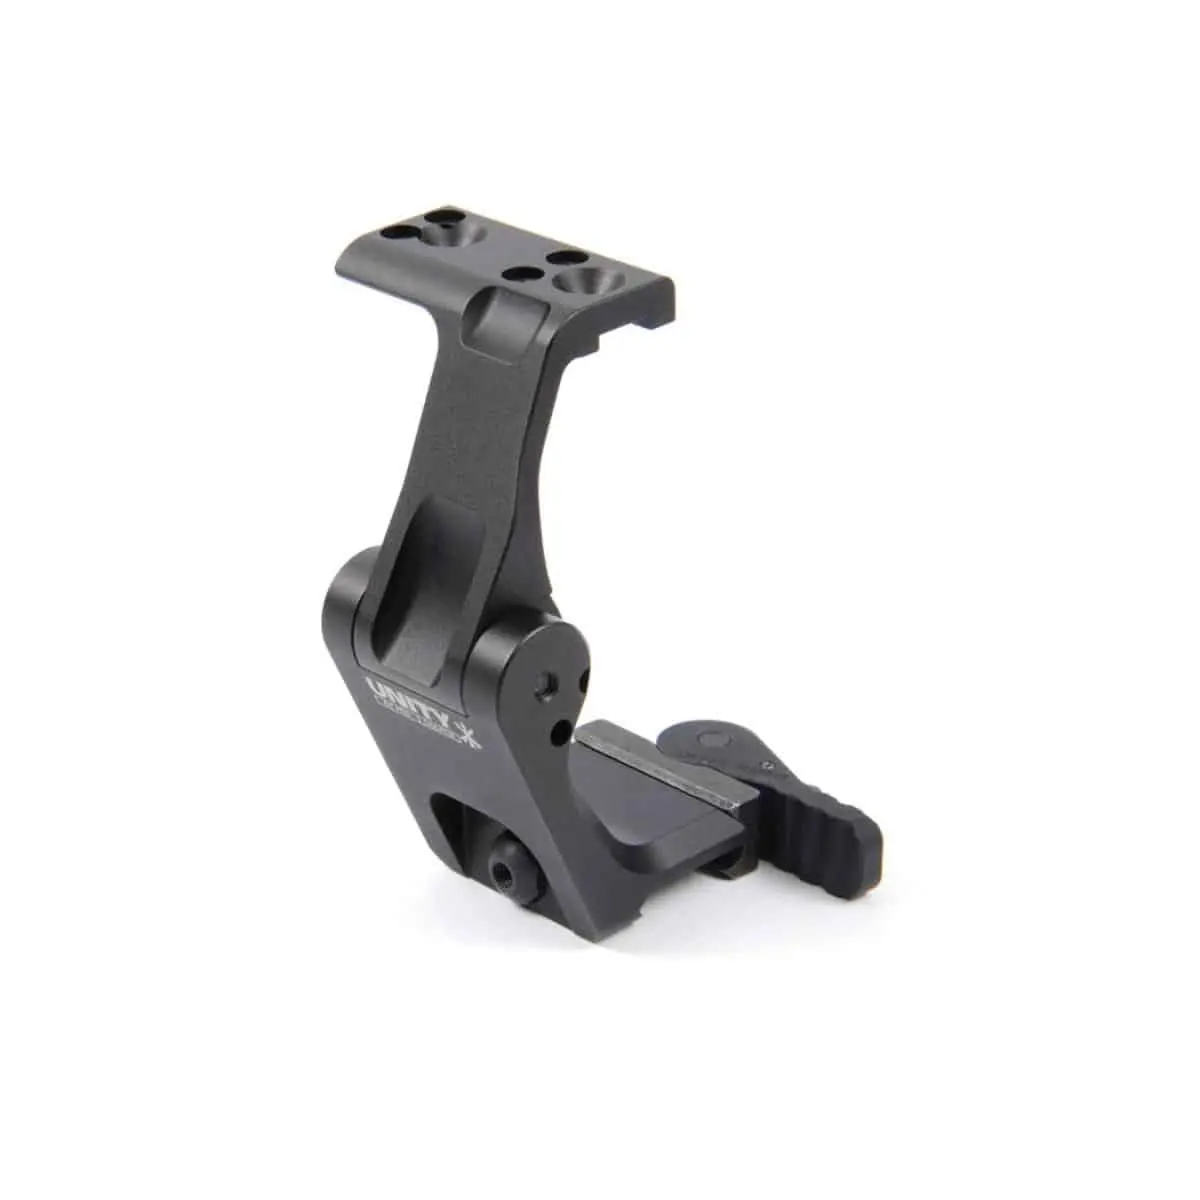 unity tactical fast ftc omni magnifier mount 4